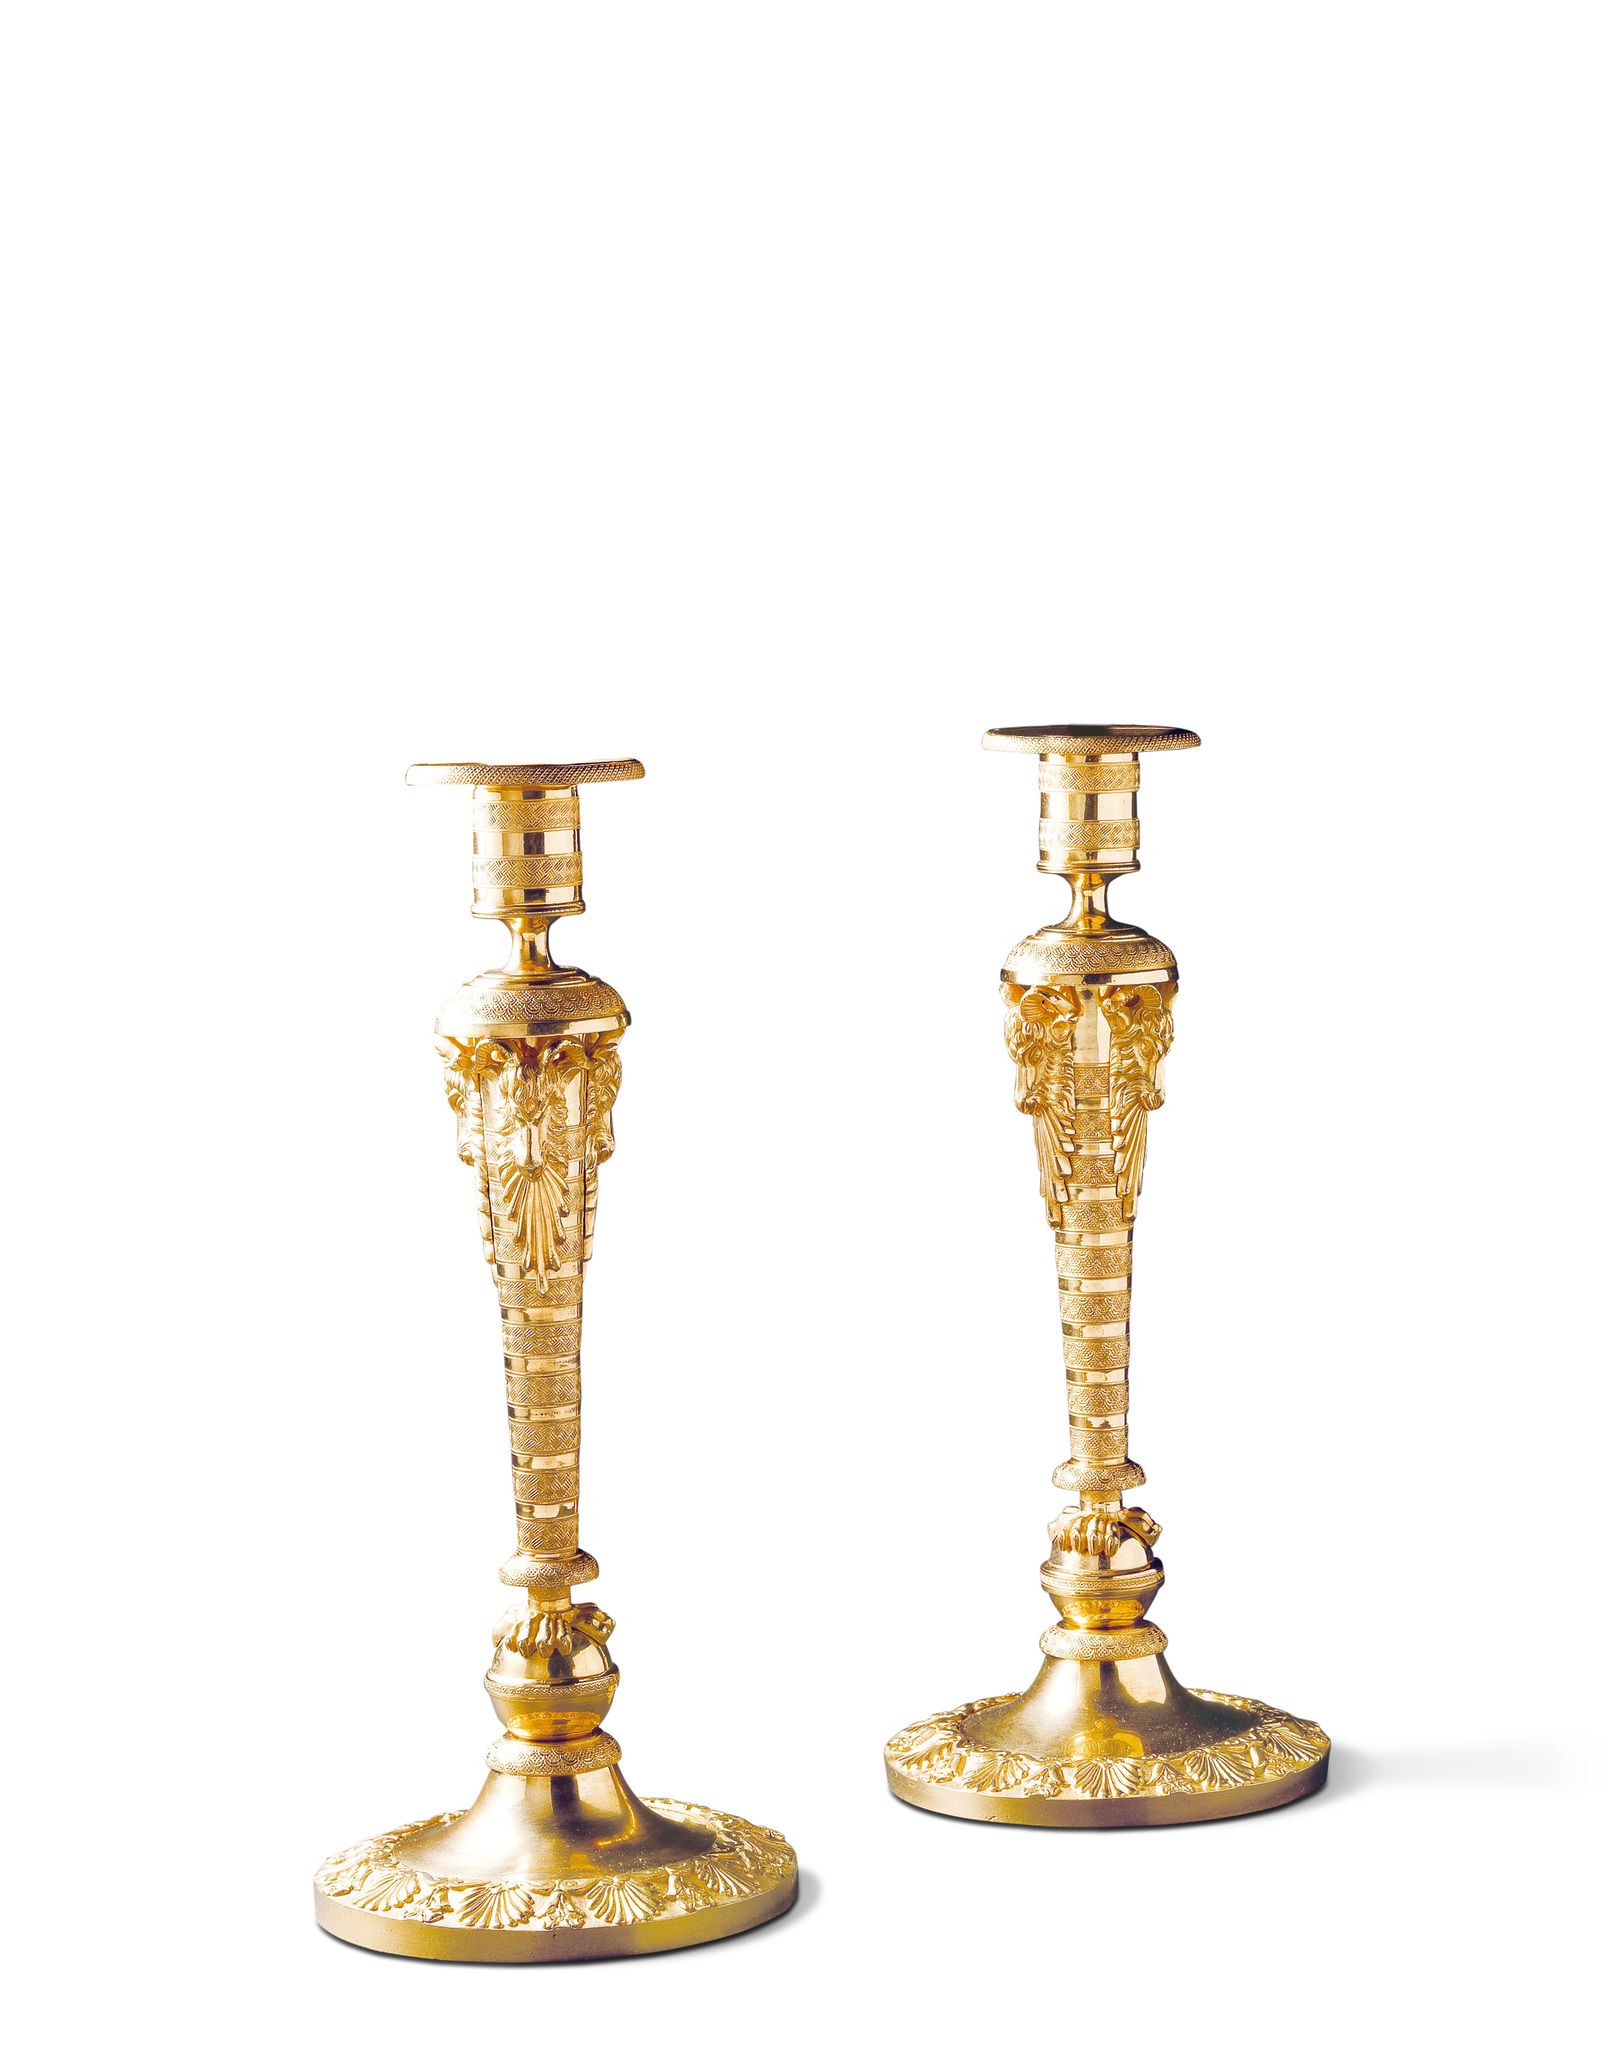 A Pair of Russian Candlesticks Russia circa 1810, with finely turned and crisply cast ornament,